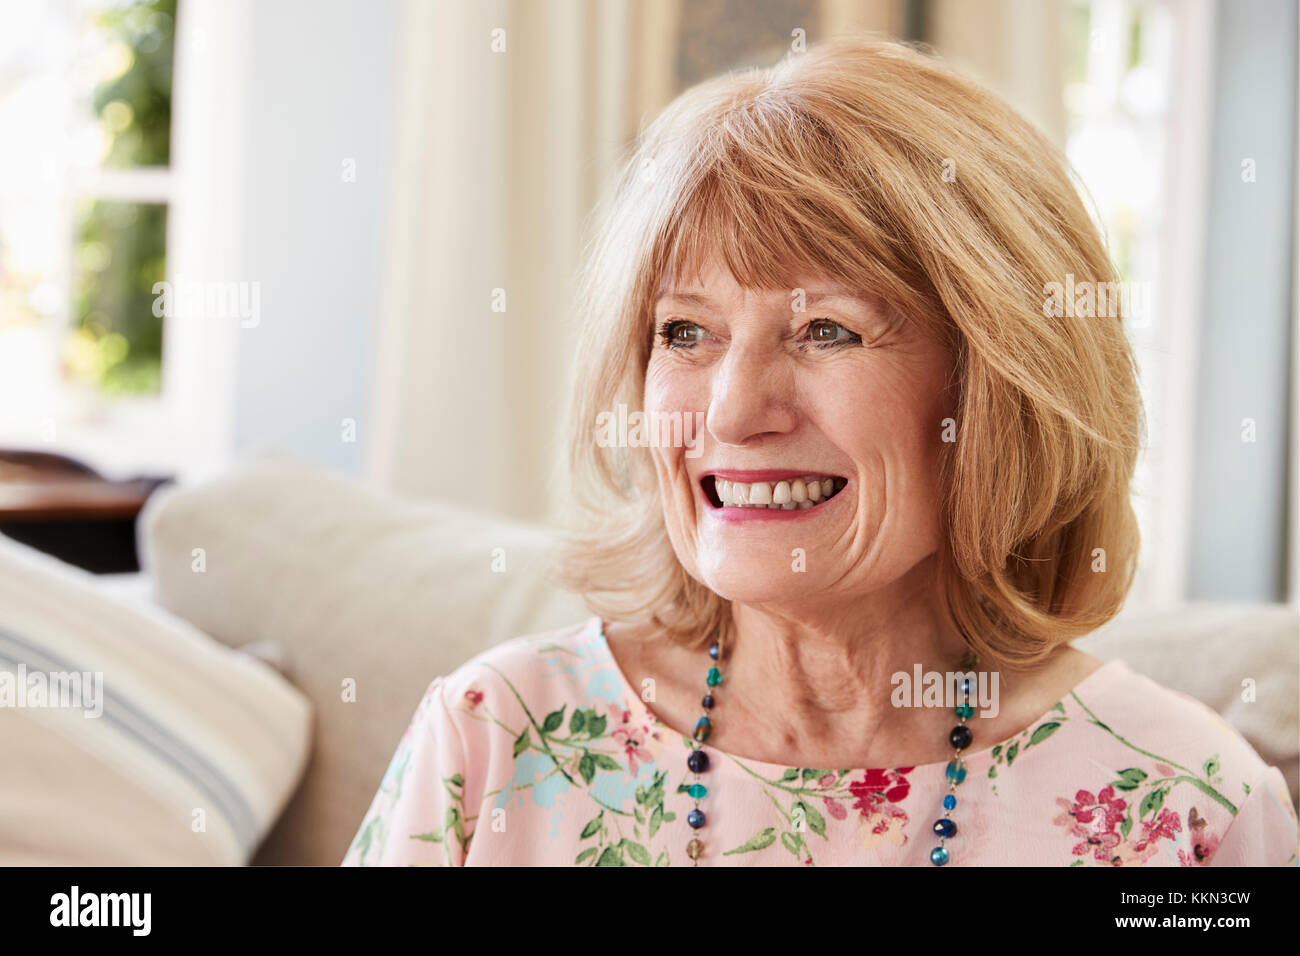 Smiling Senior Woman Sitting on Sofa At Home Banque D'Images